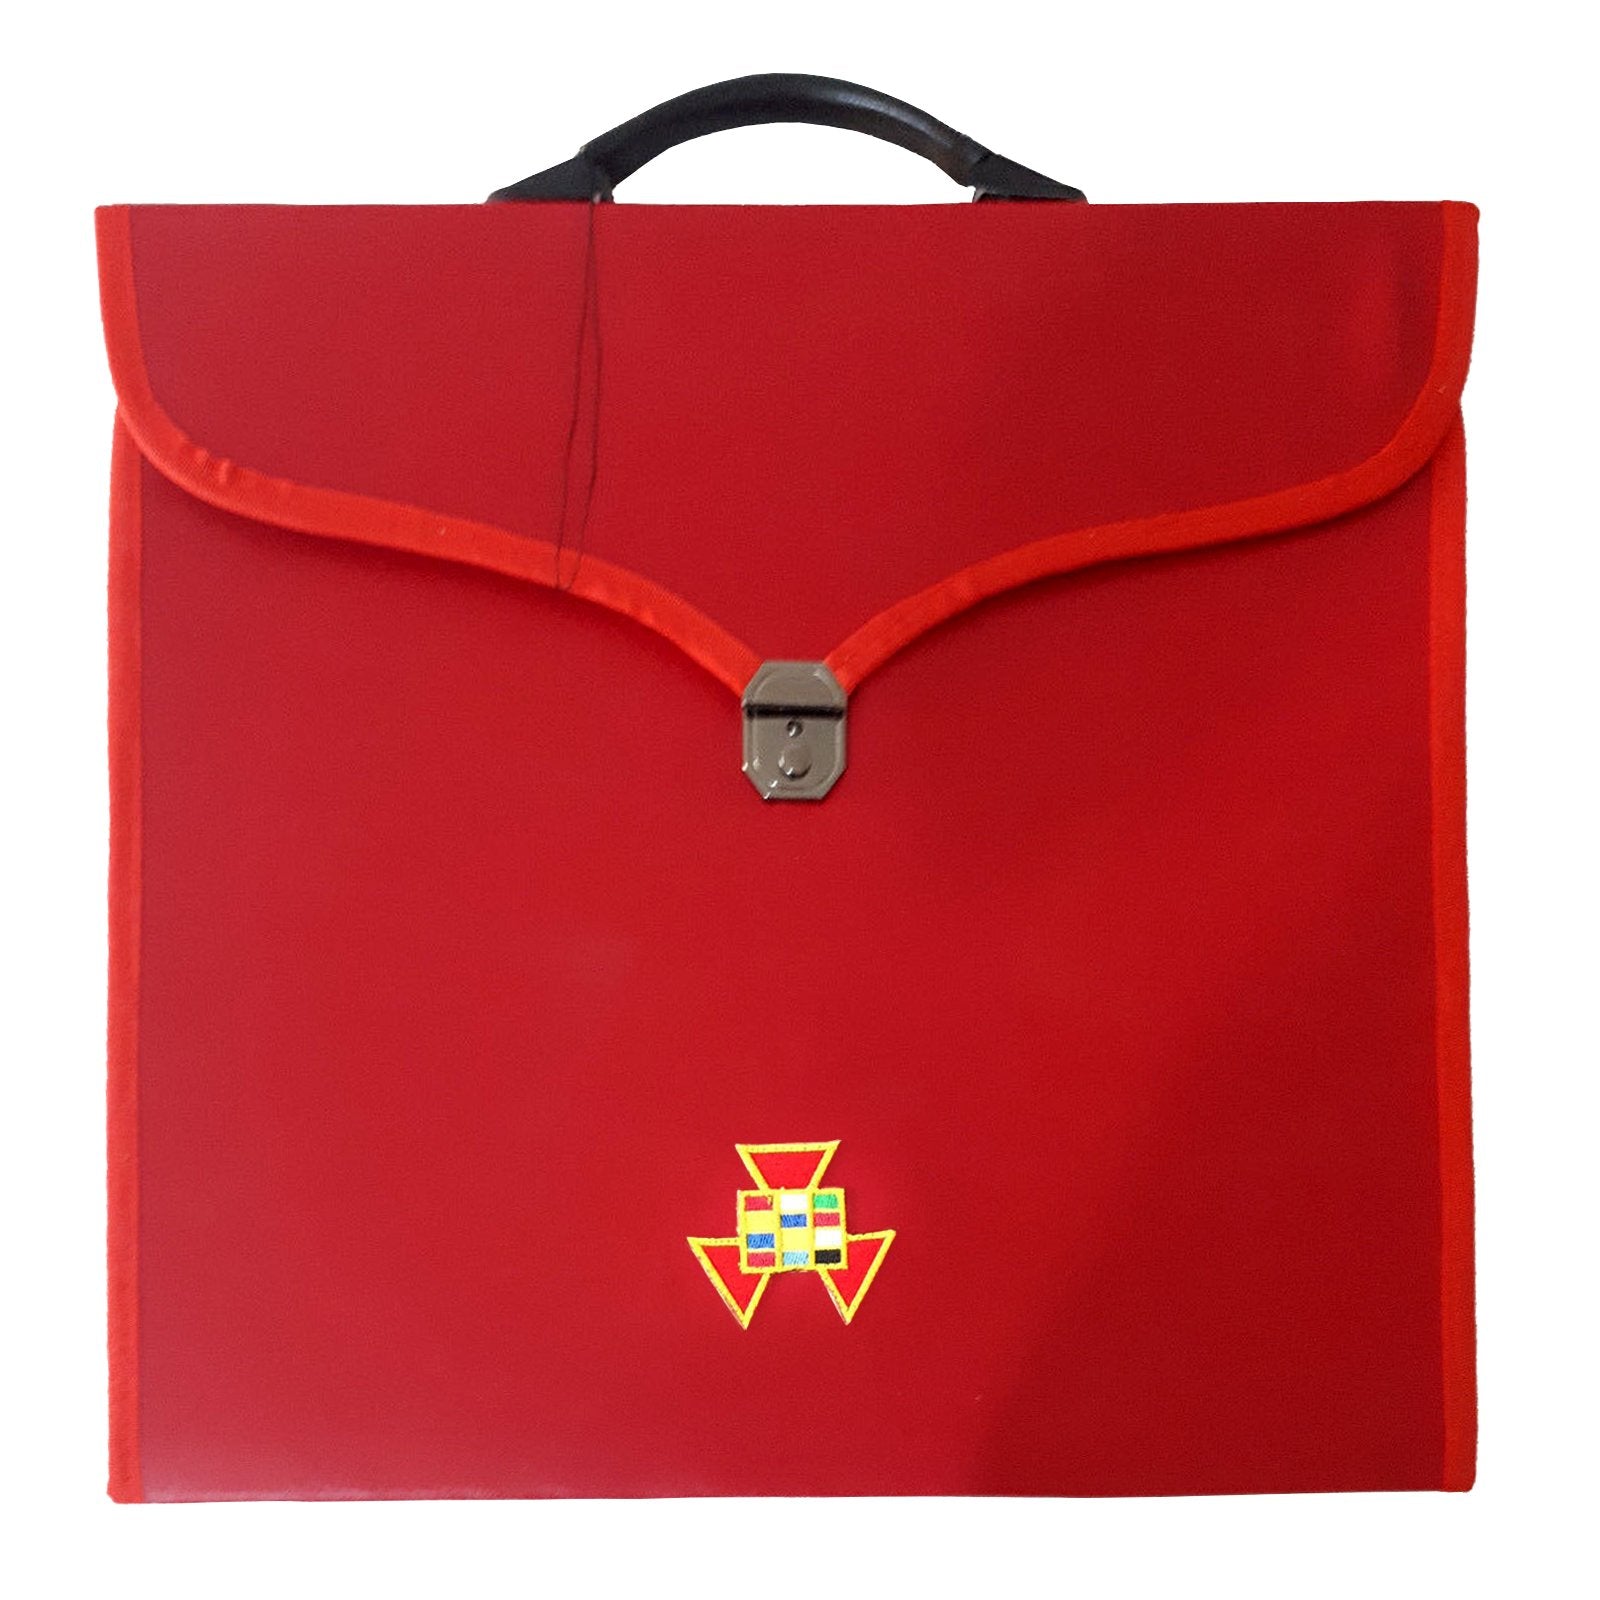 Past High Priest Chapter Apron Case - Red Leather MM, WM, Provincial - Bricks Masons